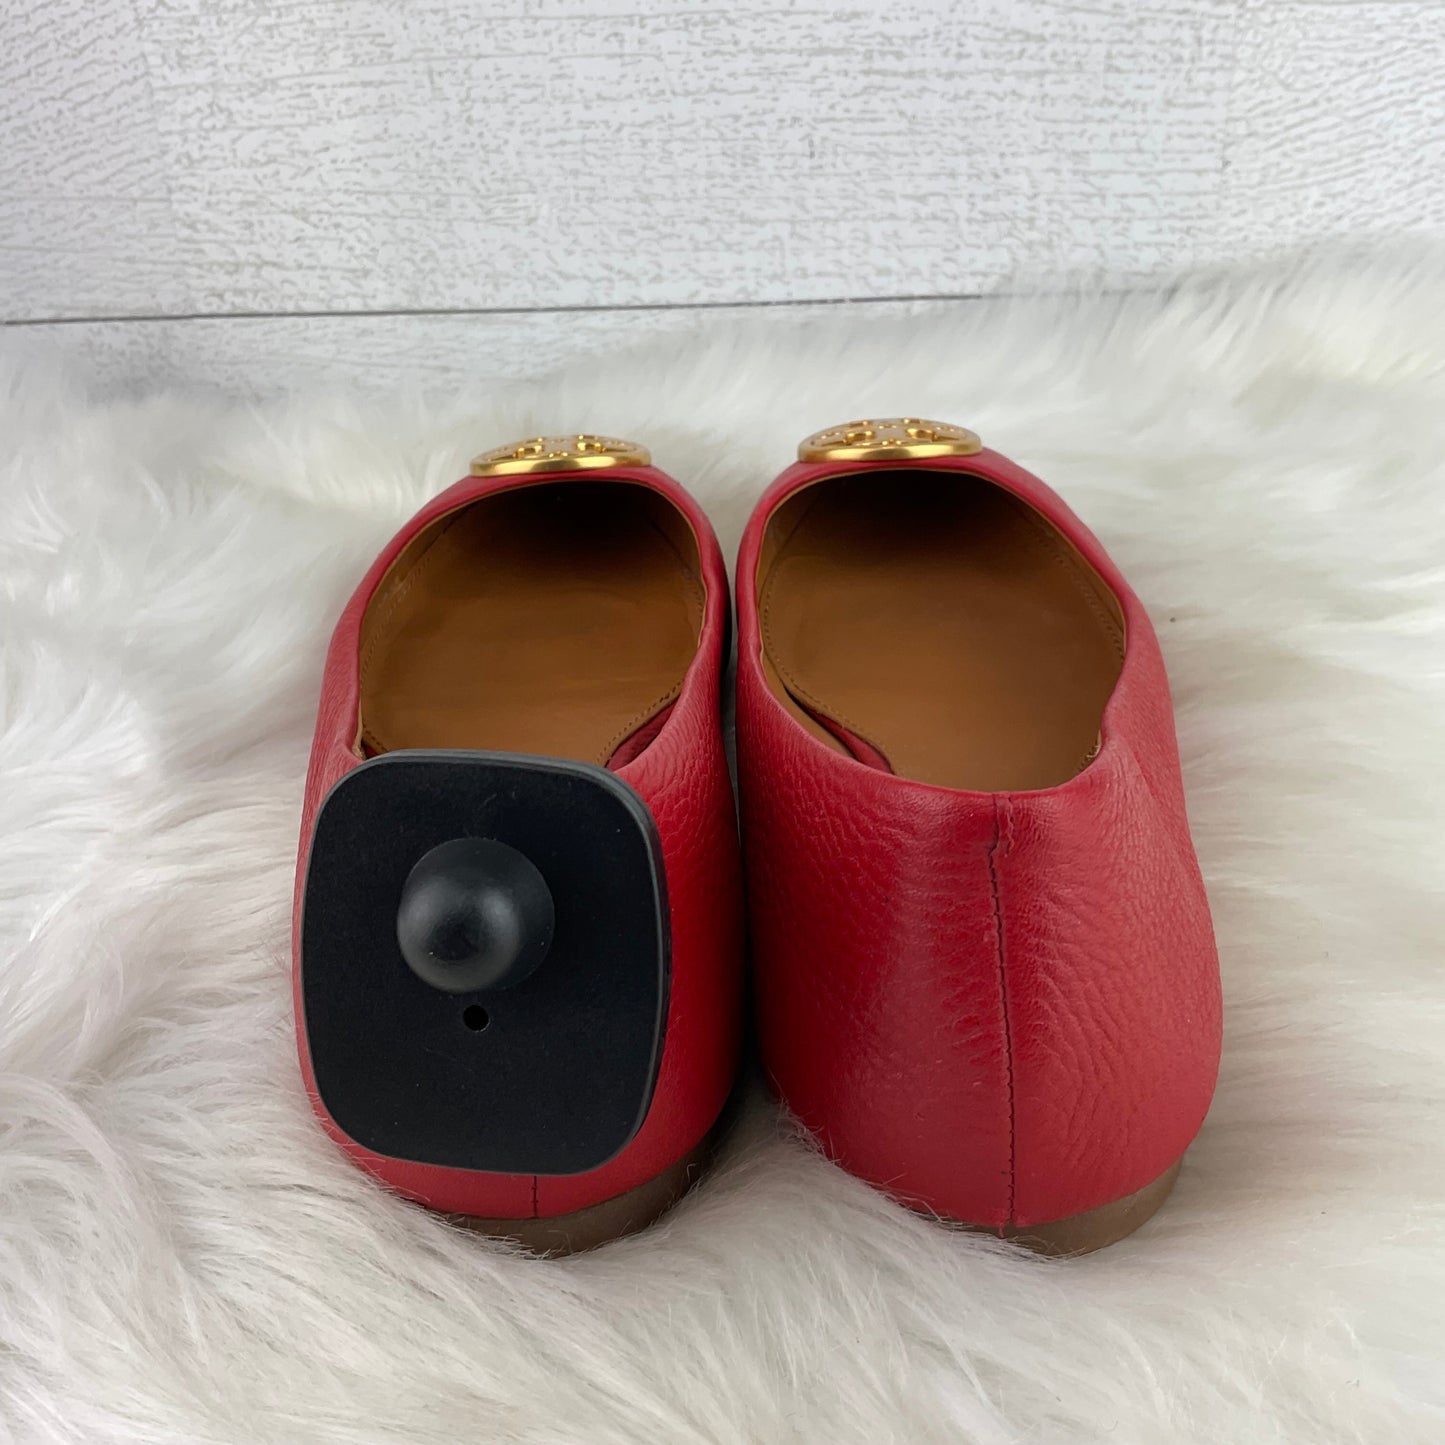 Red Sandals Designer Tory Burch, Size 7.5